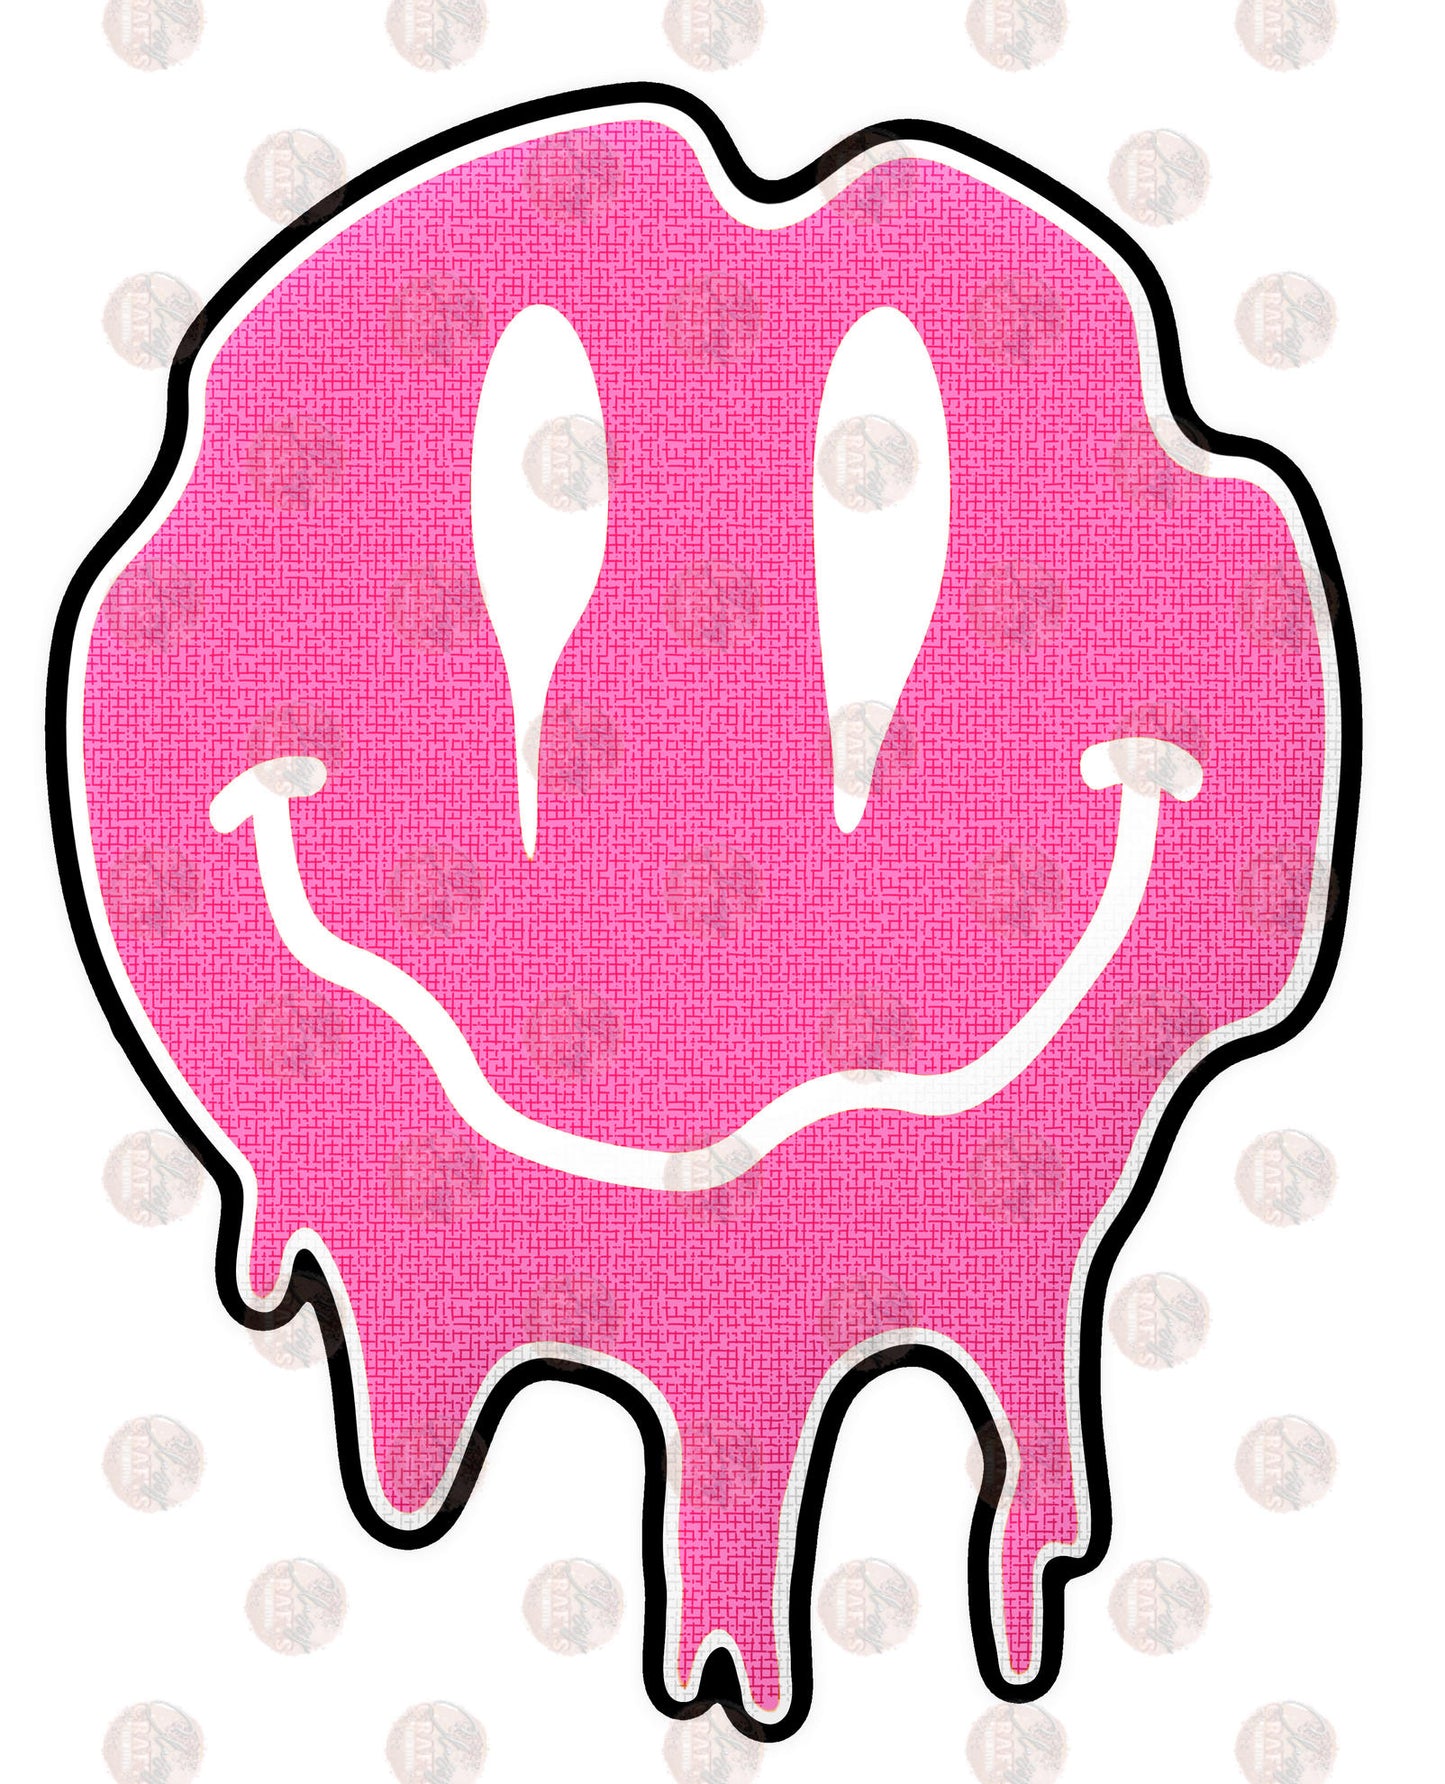 Smiley Drip Pink - Sublimation Transfer